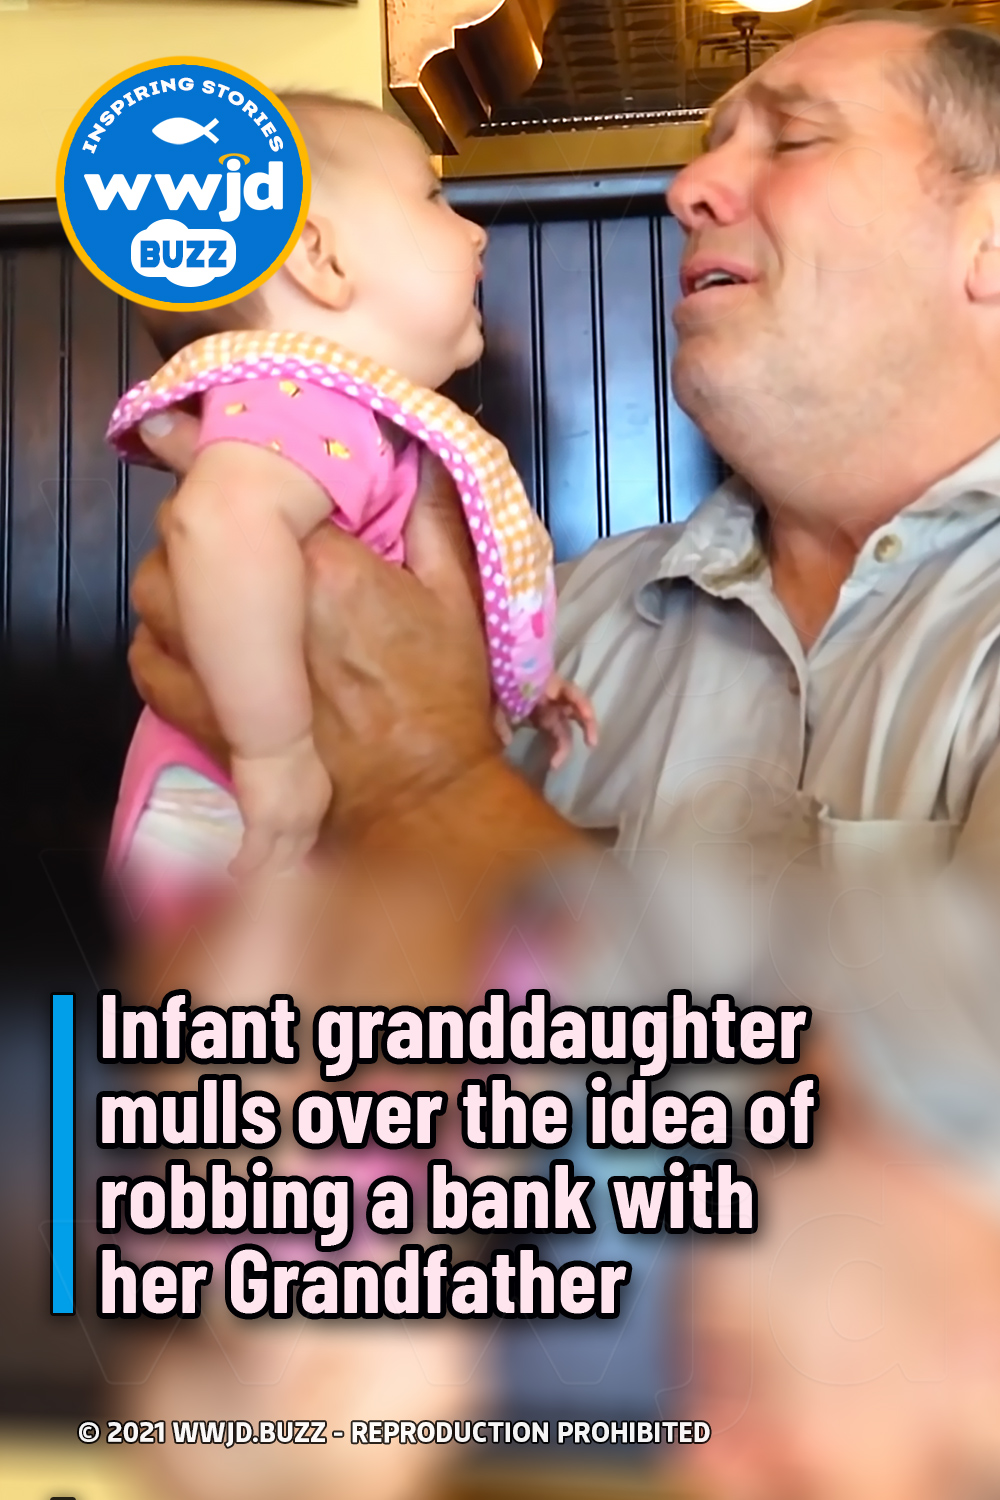 Infant granddaughter mulls over the idea of robbing a bank with her Grandfather